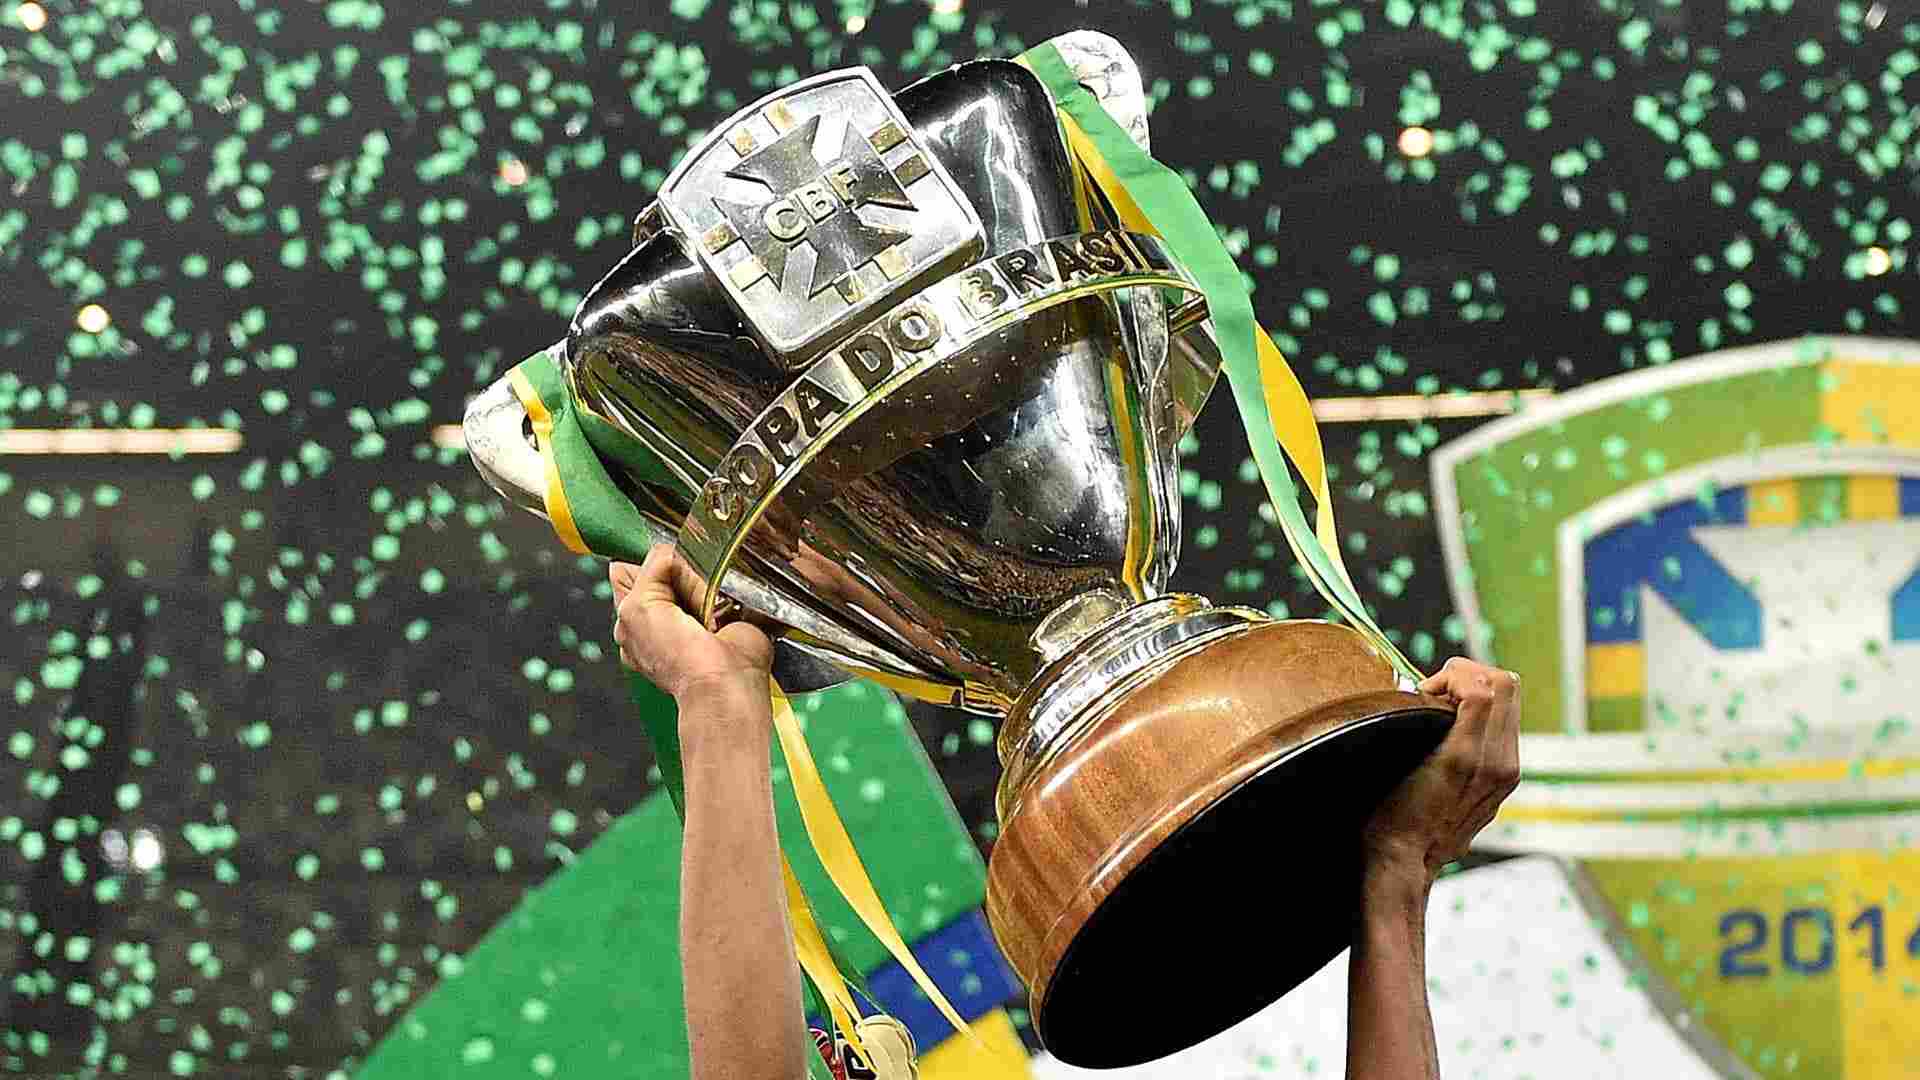 Flamengo vs Corinthians: who will win the New Zealand Cup? Here's How To Bet Online!